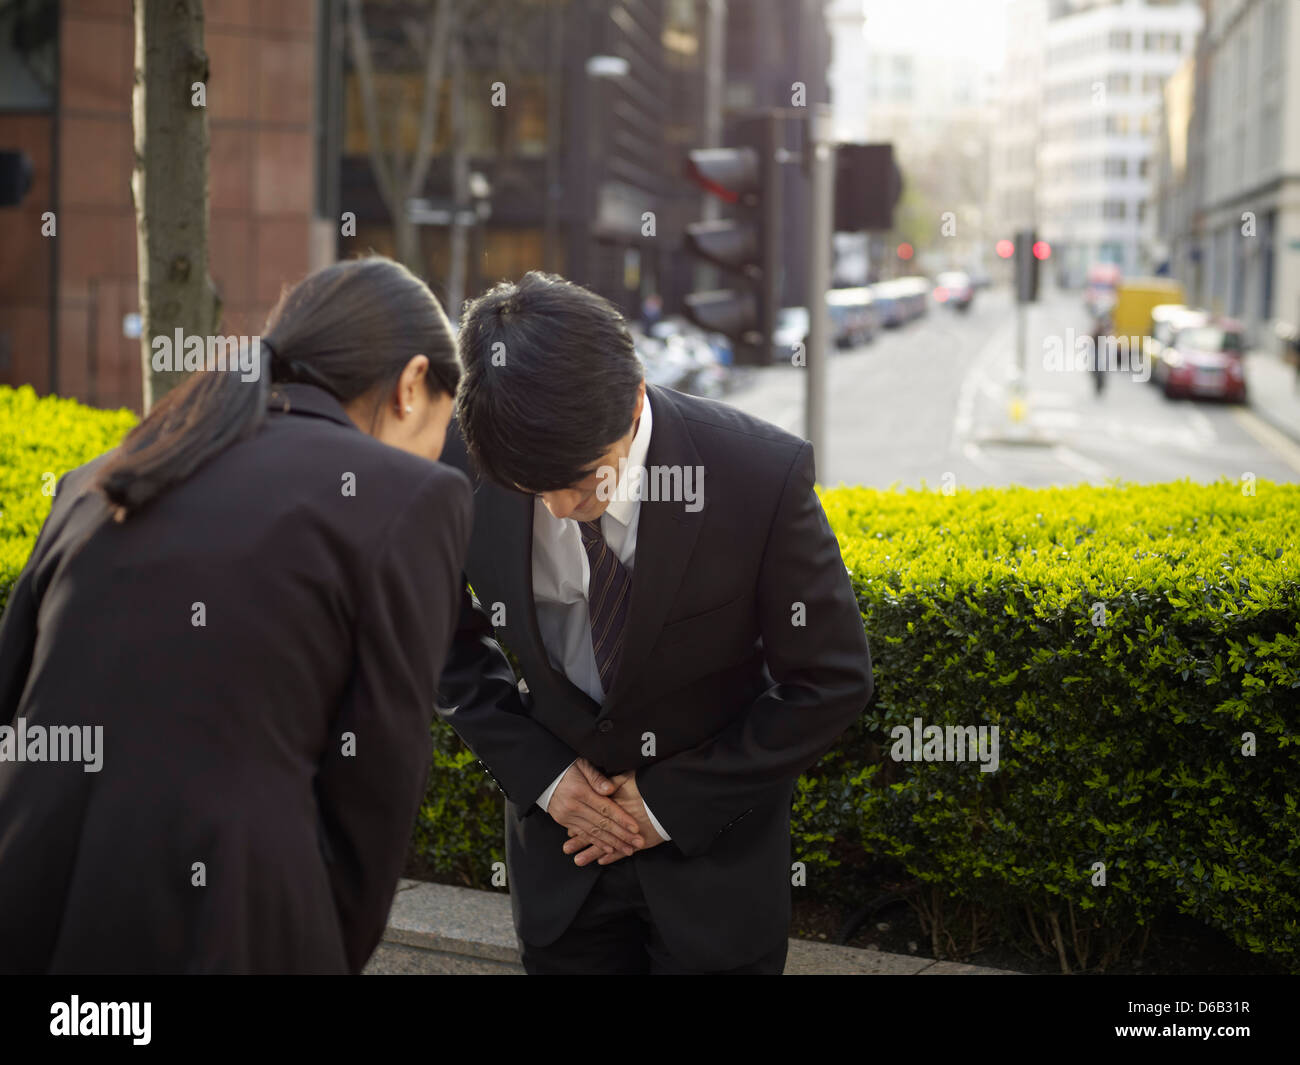 business-people-bowing-to-each-other-D6B31R.jpg